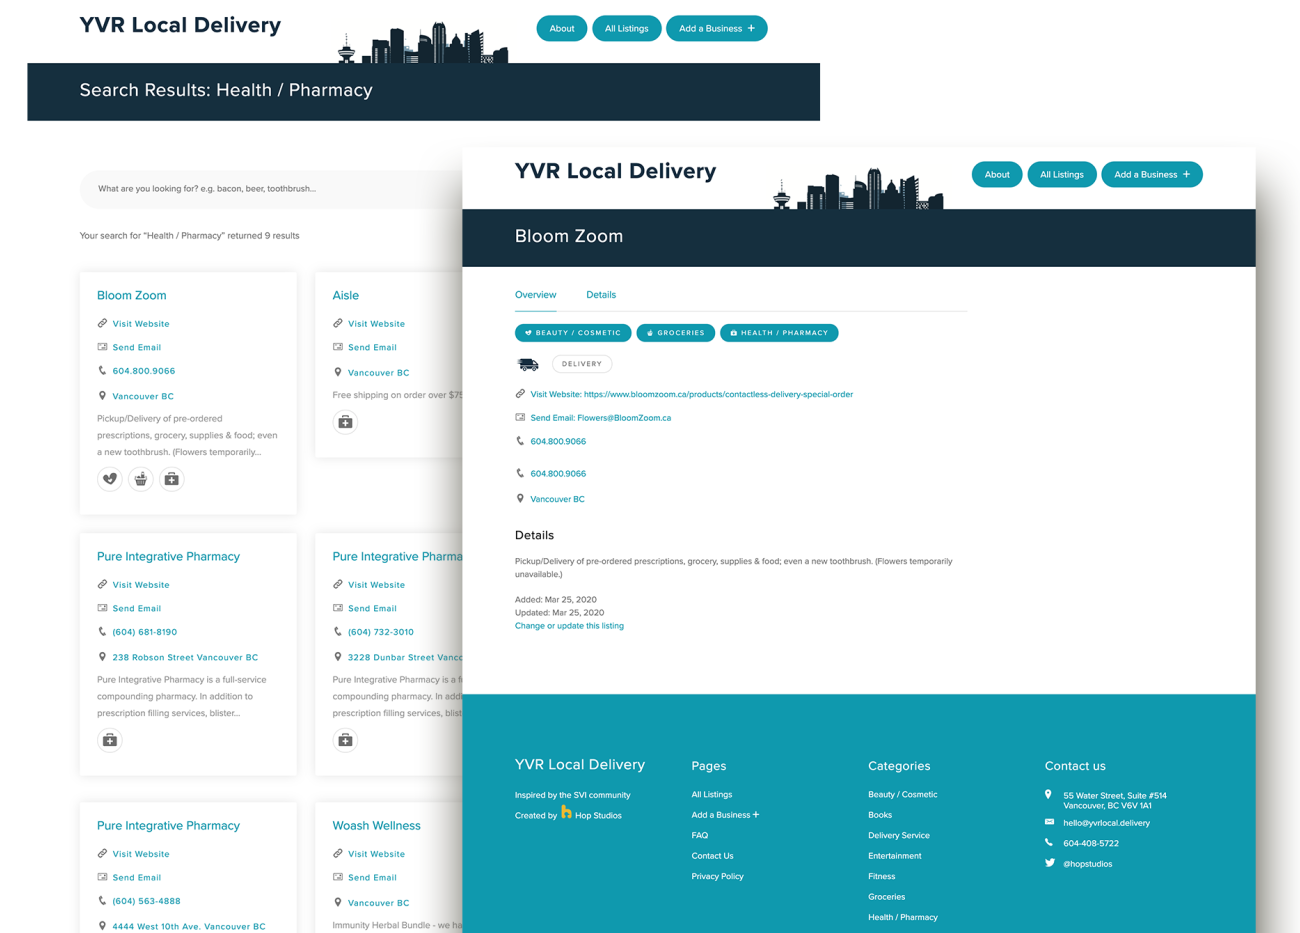 Screenshot of YVR Local Delivery Listing category and listing page